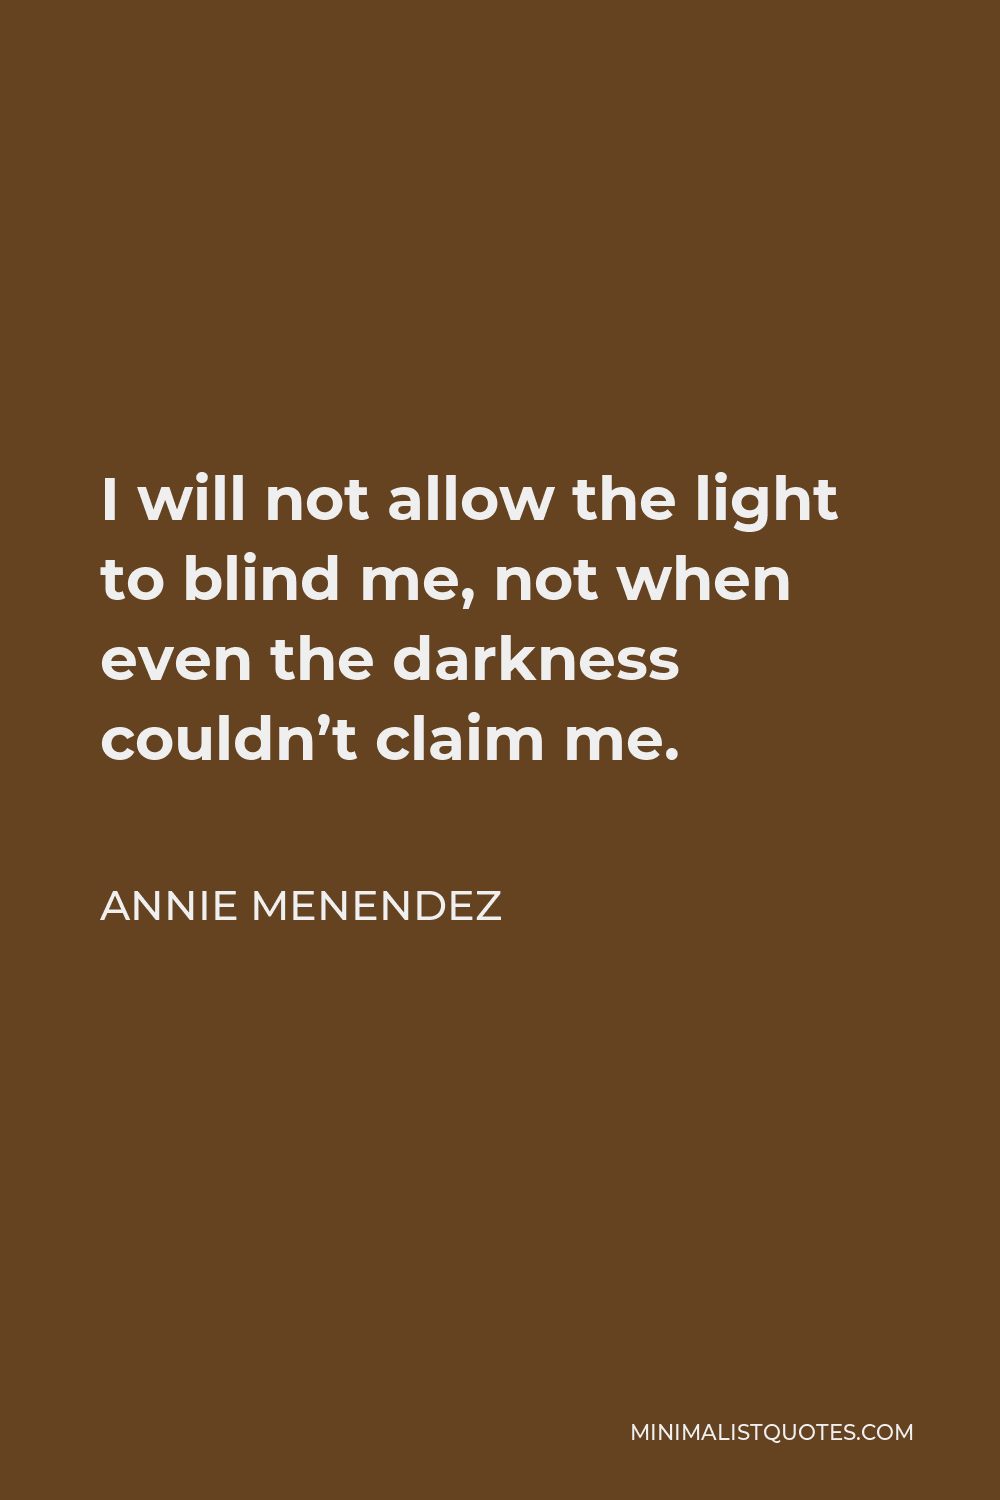 Annie Menendez Quote - I will not allow the light to blind me, not when even the darkness couldn’t claim me.